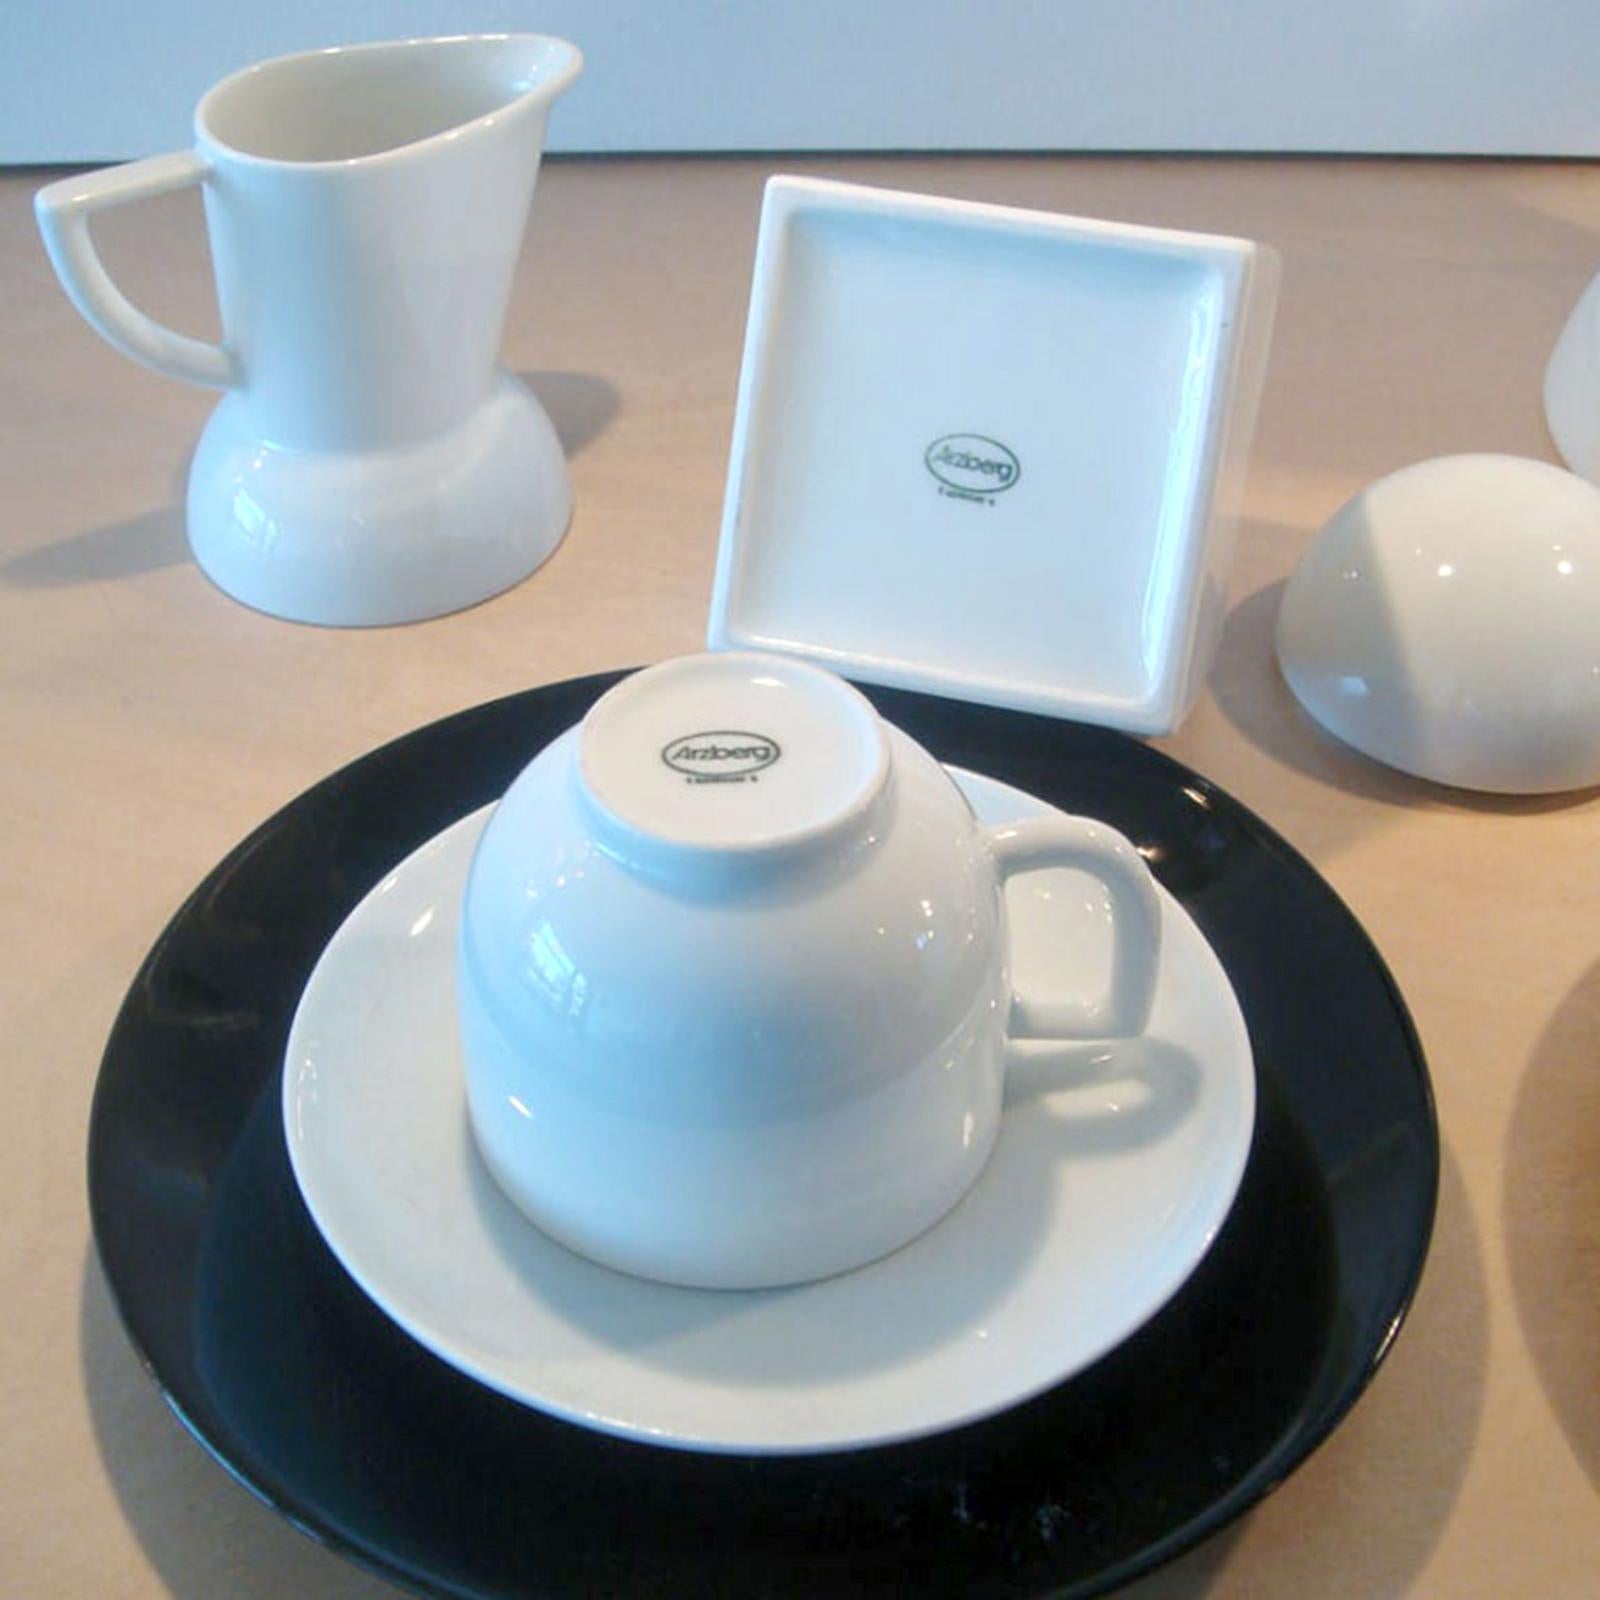 Lutz Rabold 'City Scape' Tea Set for Arzberg, 1980 In Good Condition For Sale In Los Angeles, CA